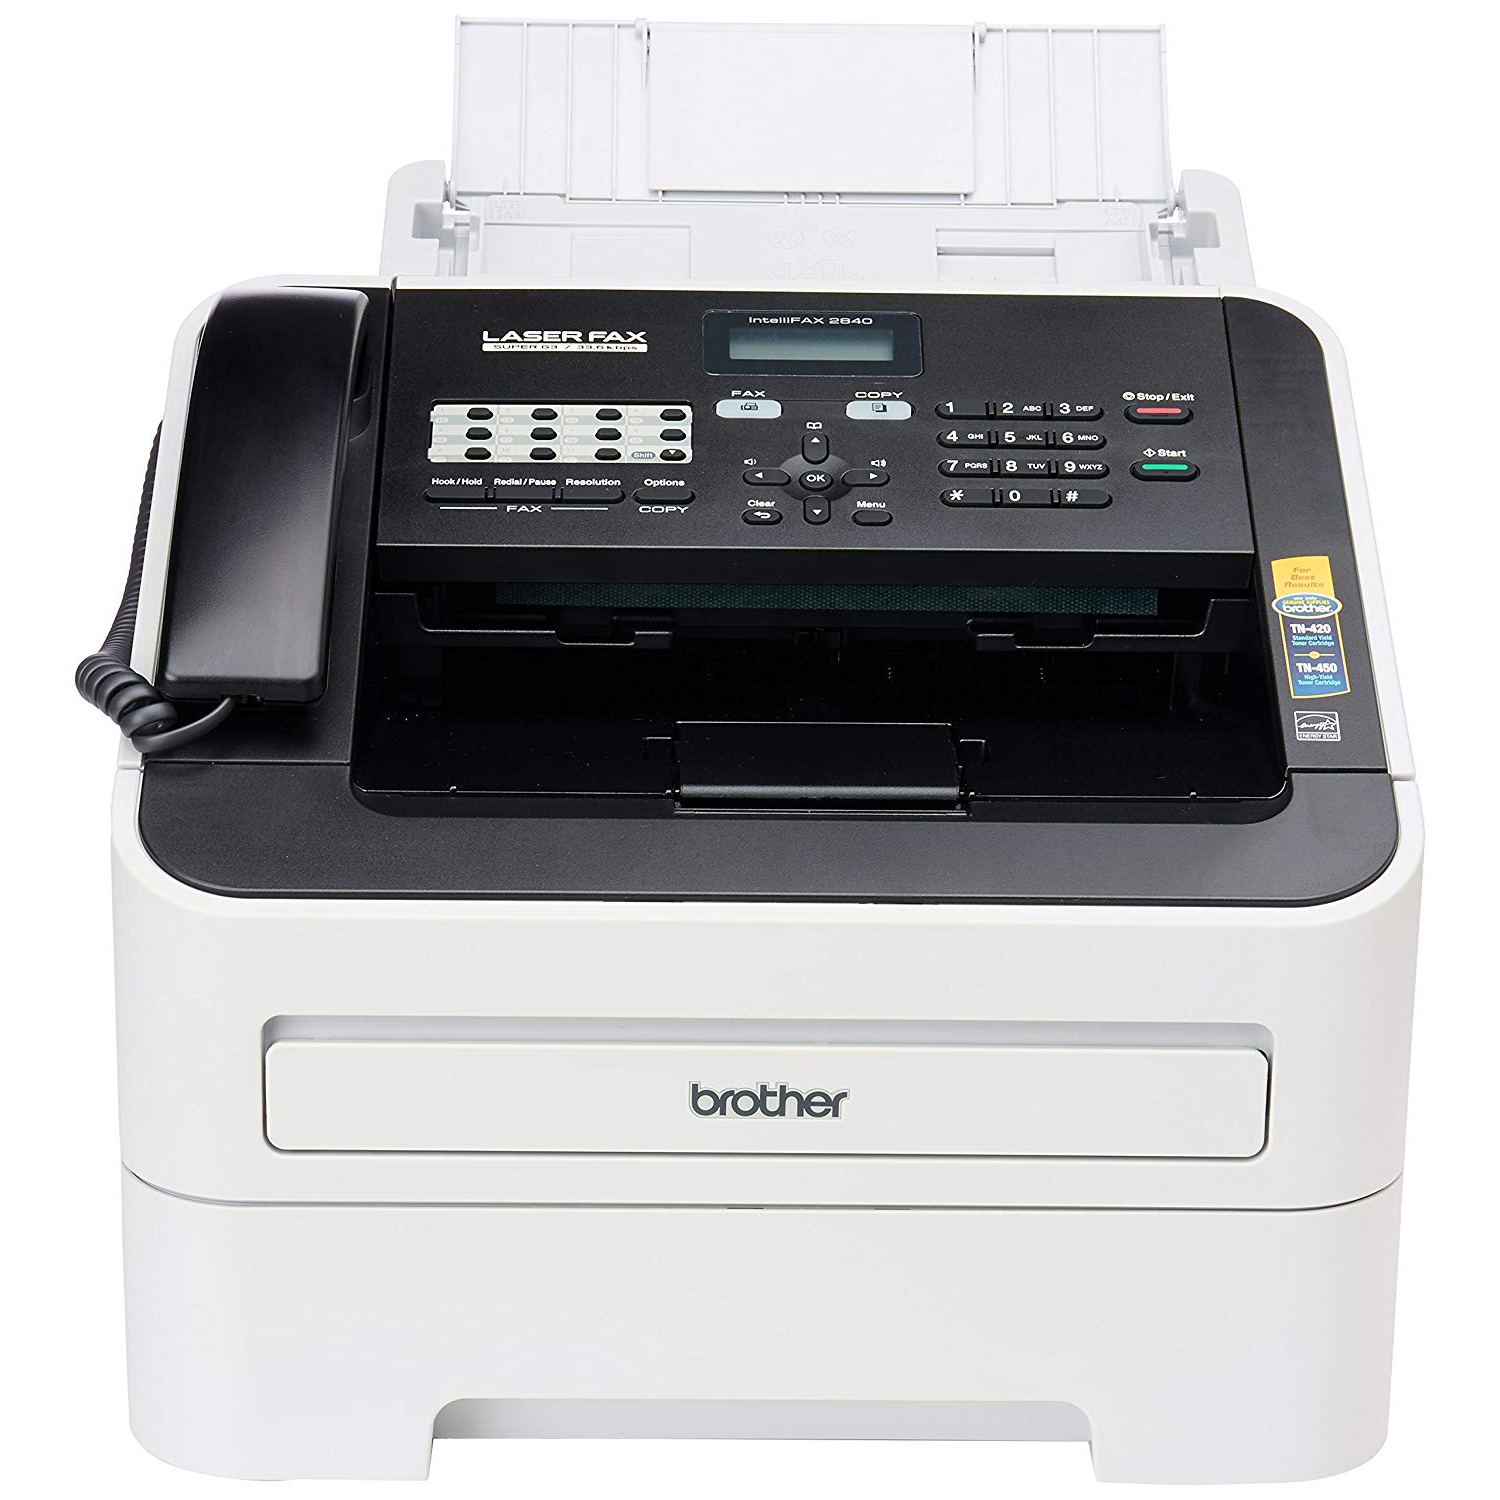 Brother Monocrom Laser Multi-Function Printer FAX-2840 Monochrome Laser Fax, Print, Copy, 16MB, ADF-Upto 20 sheets, 33.6kbps Modem speed, Upto 1200dpi, FPOT less than 10 secs.